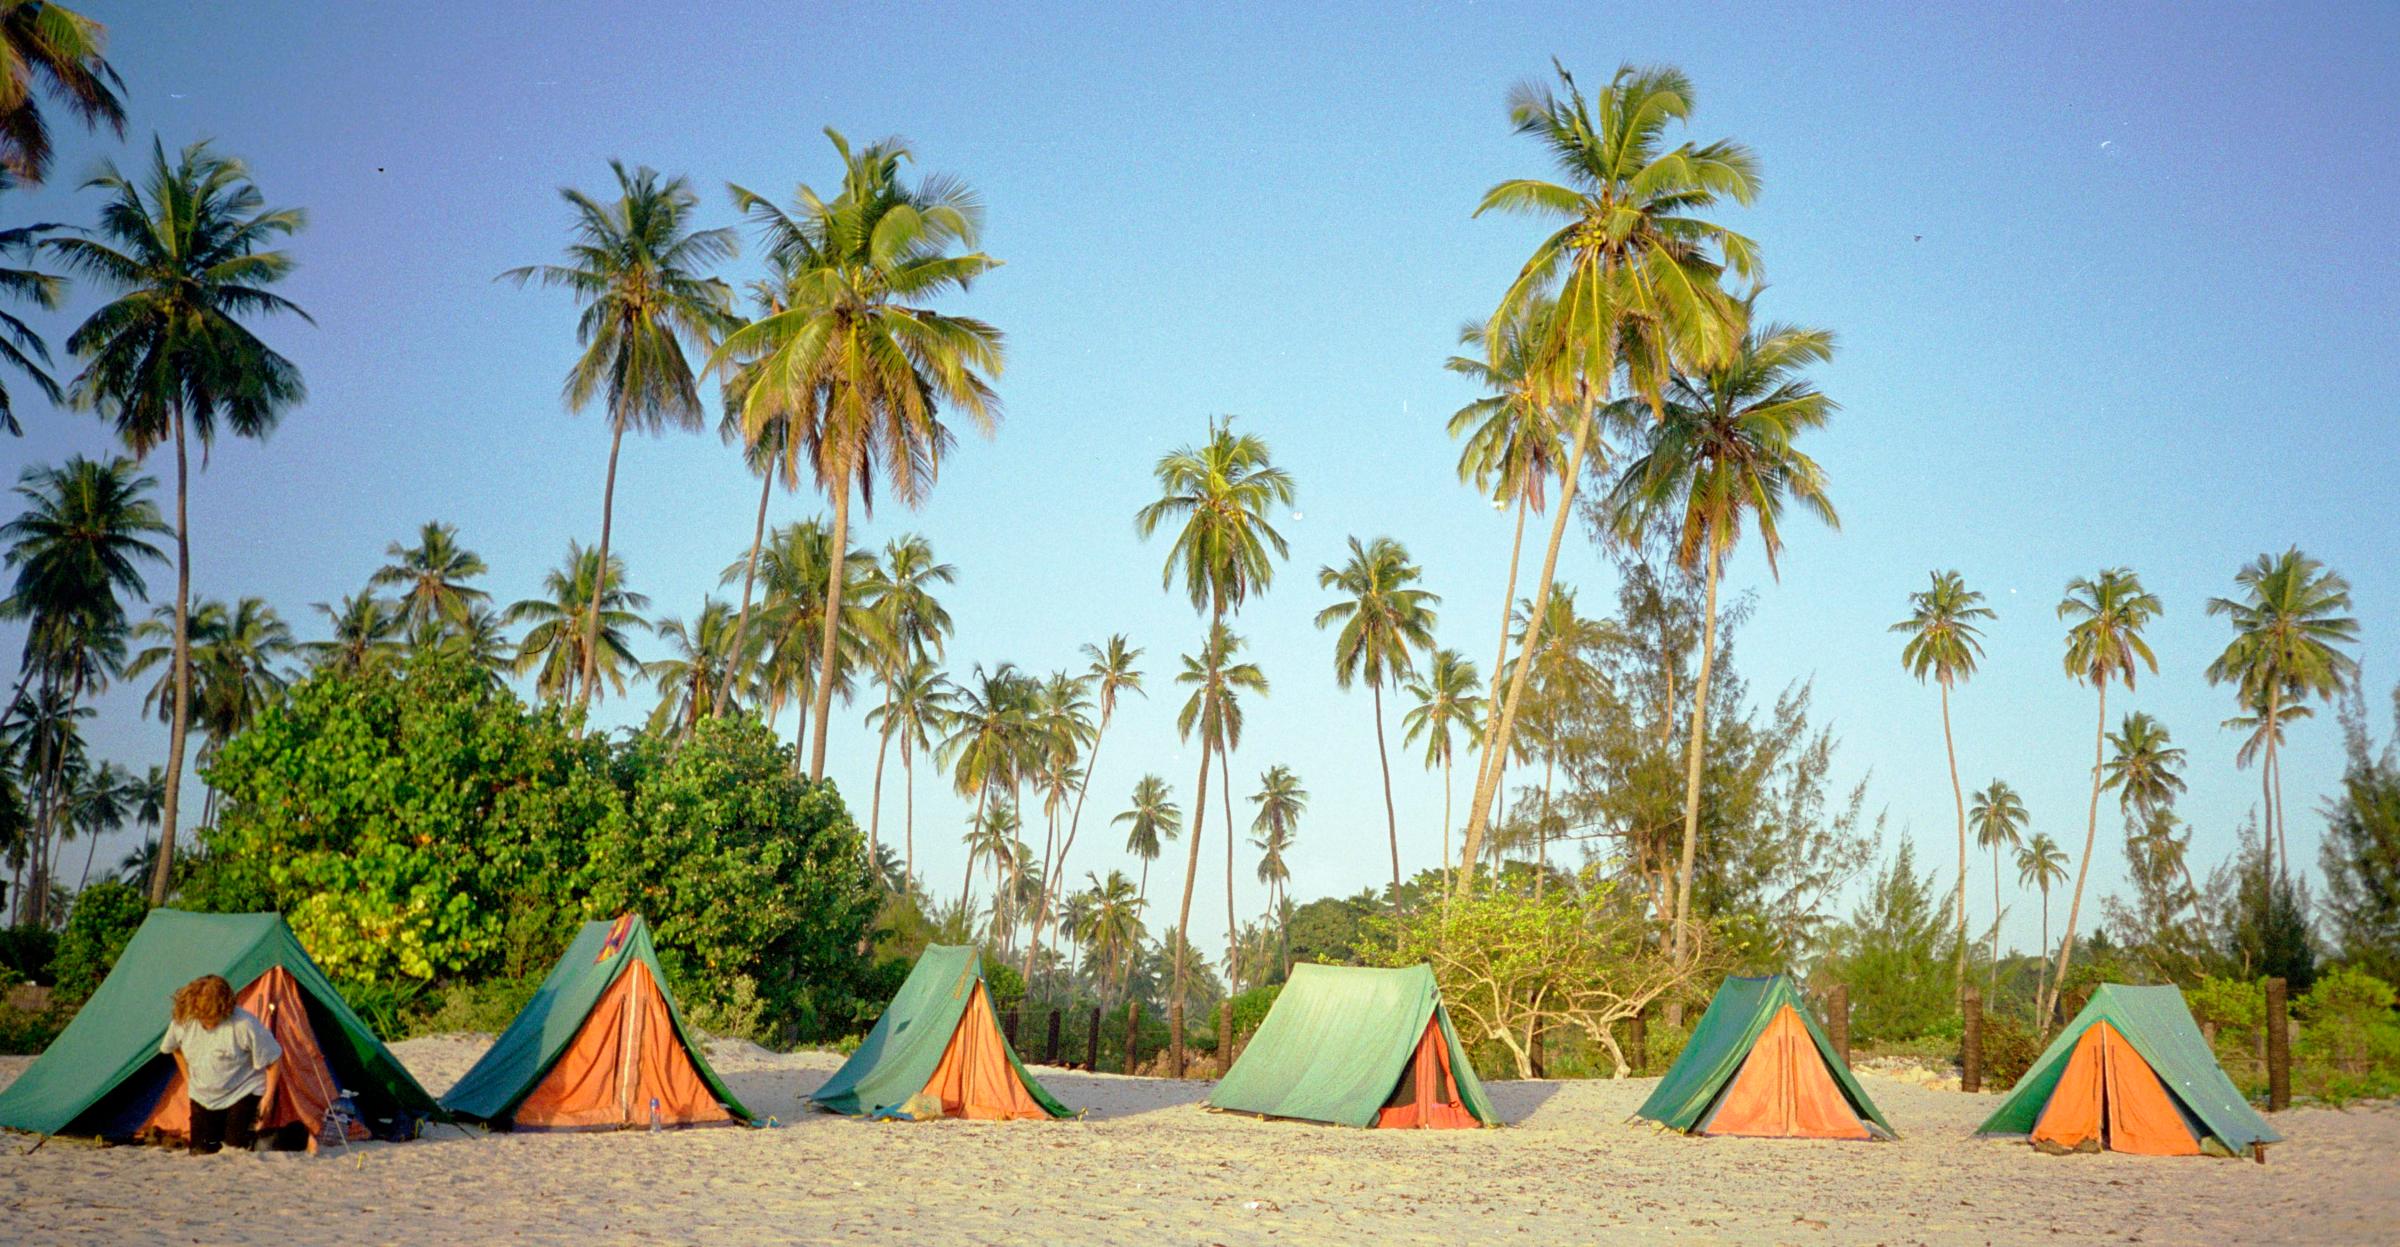 Africa, Tanzania, View Of Tourist Tents On The Beach During Adventure Travel Trip. They Are Fed Pizza And Hot Dogs, And Never Meet An African (Year 2000)